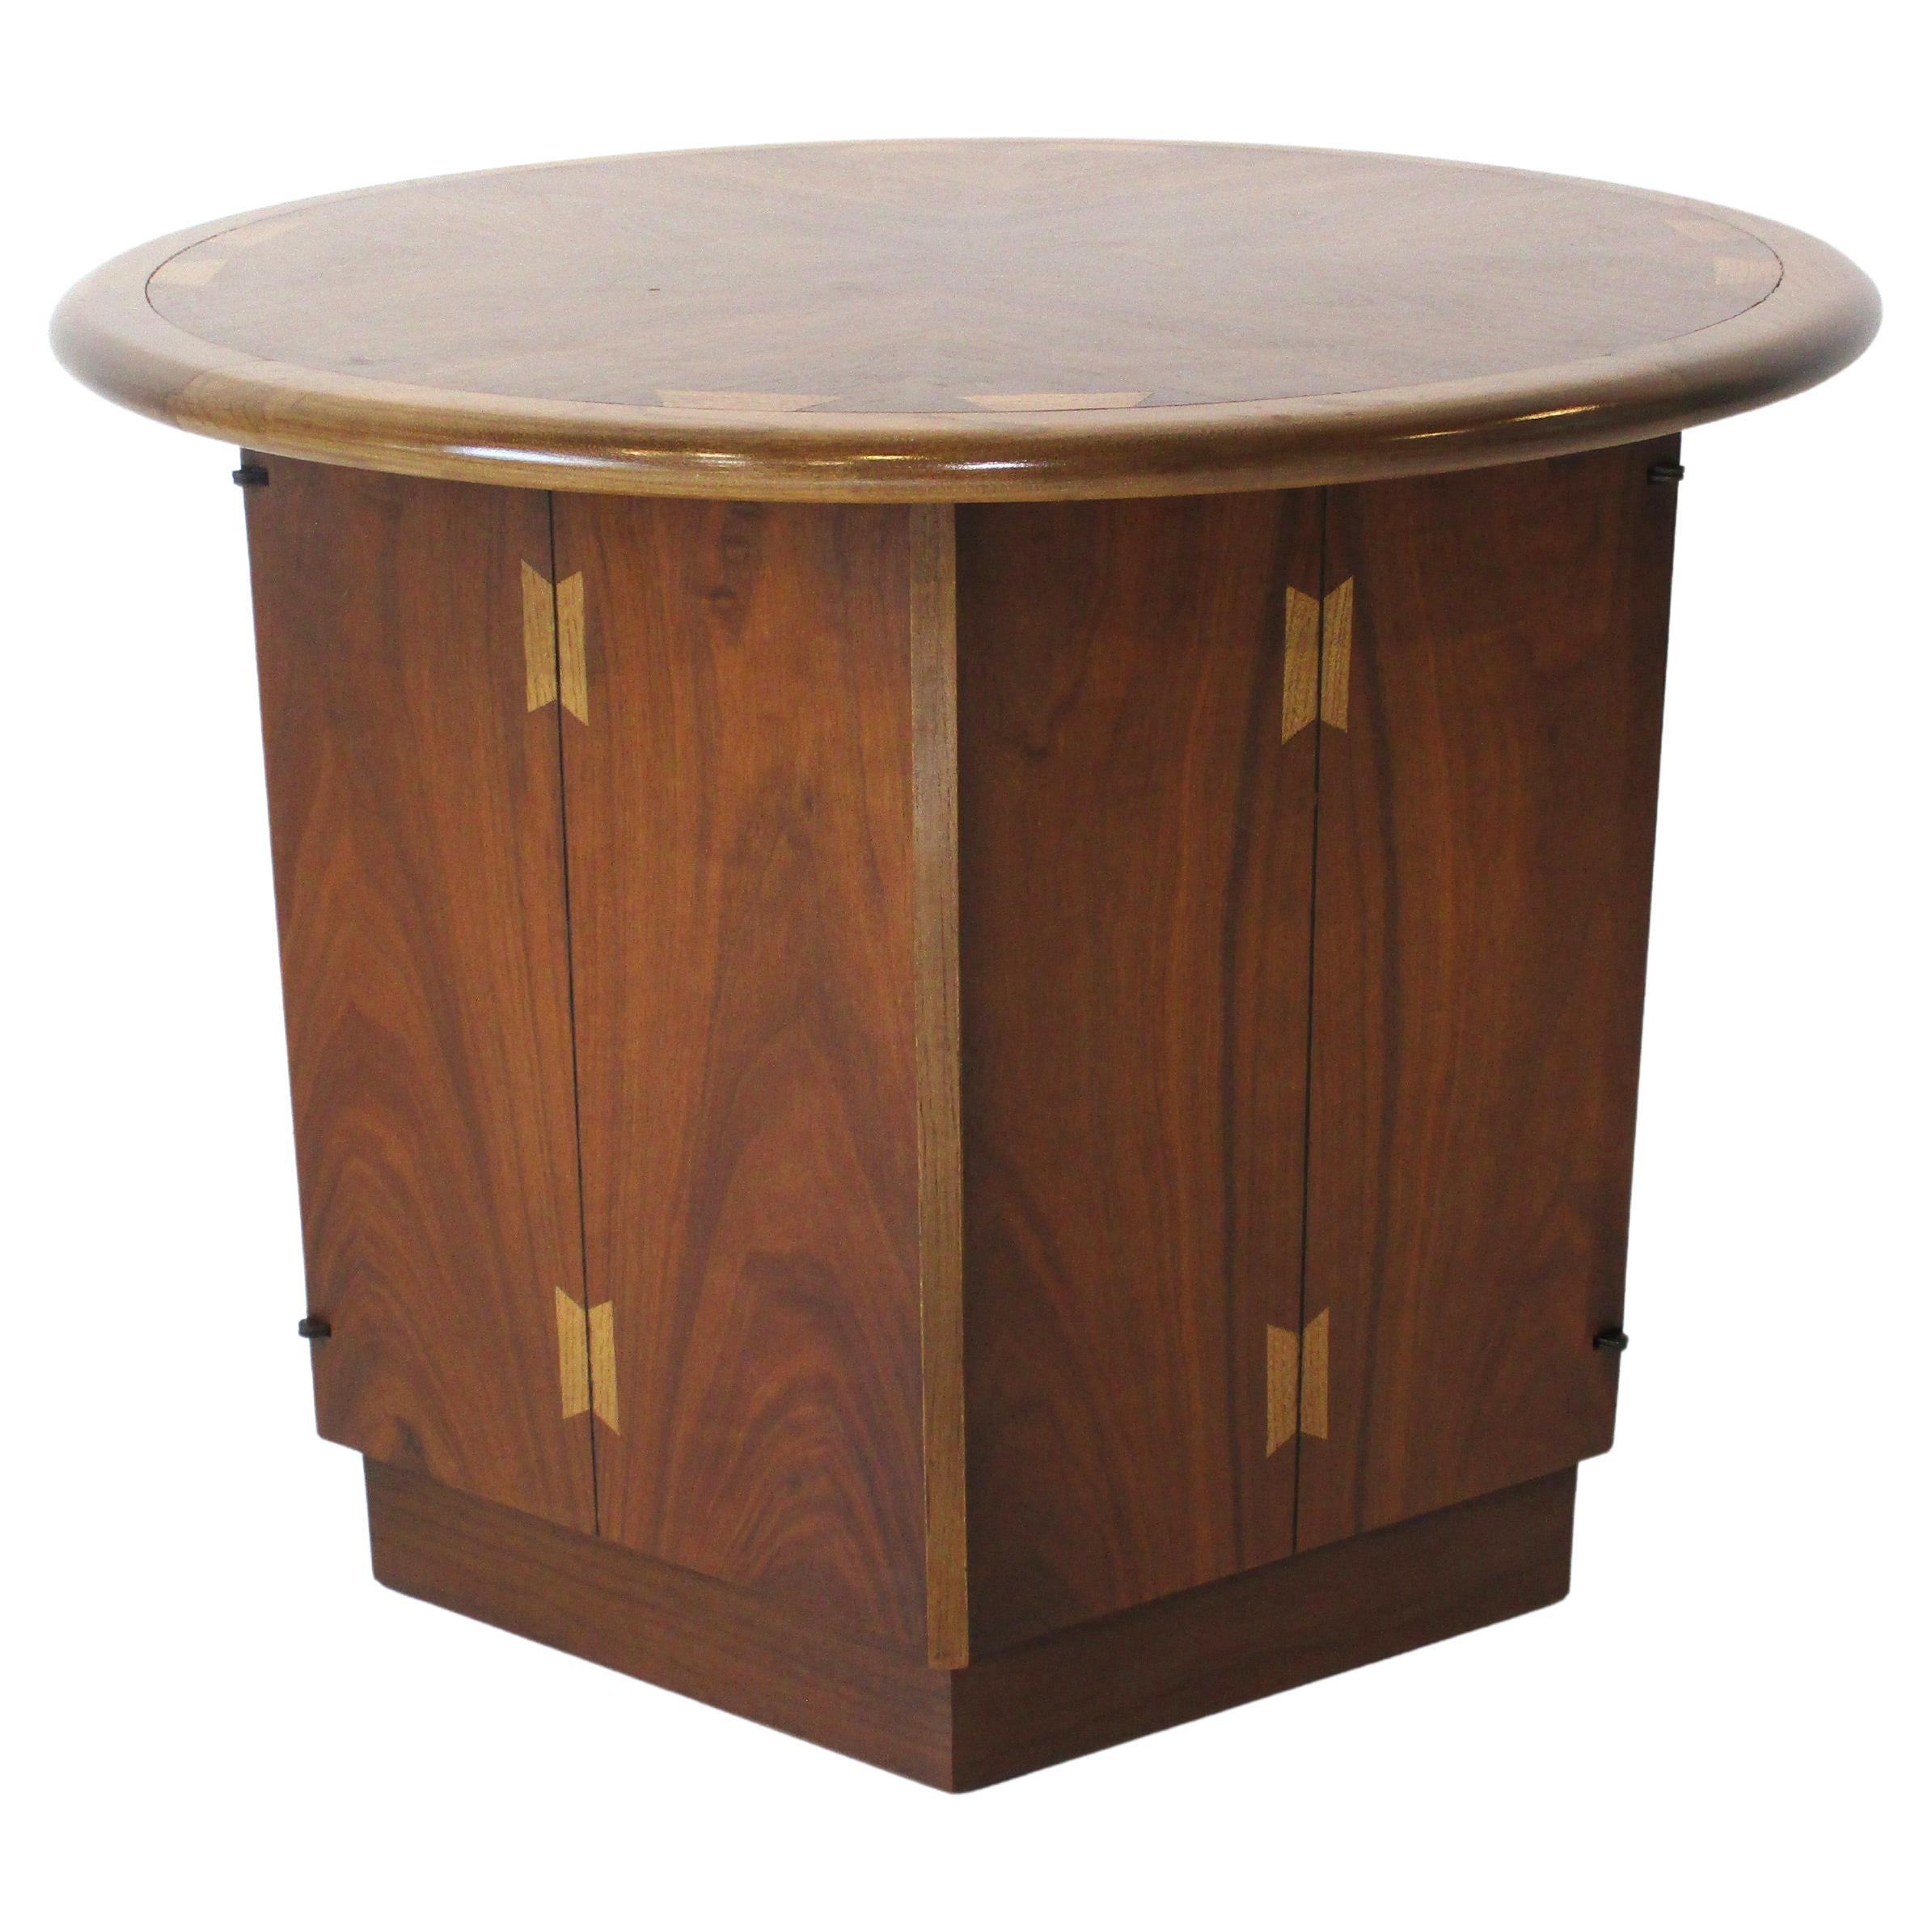 Lane Acclaim Drum Side Table with Storage by Andre Bus